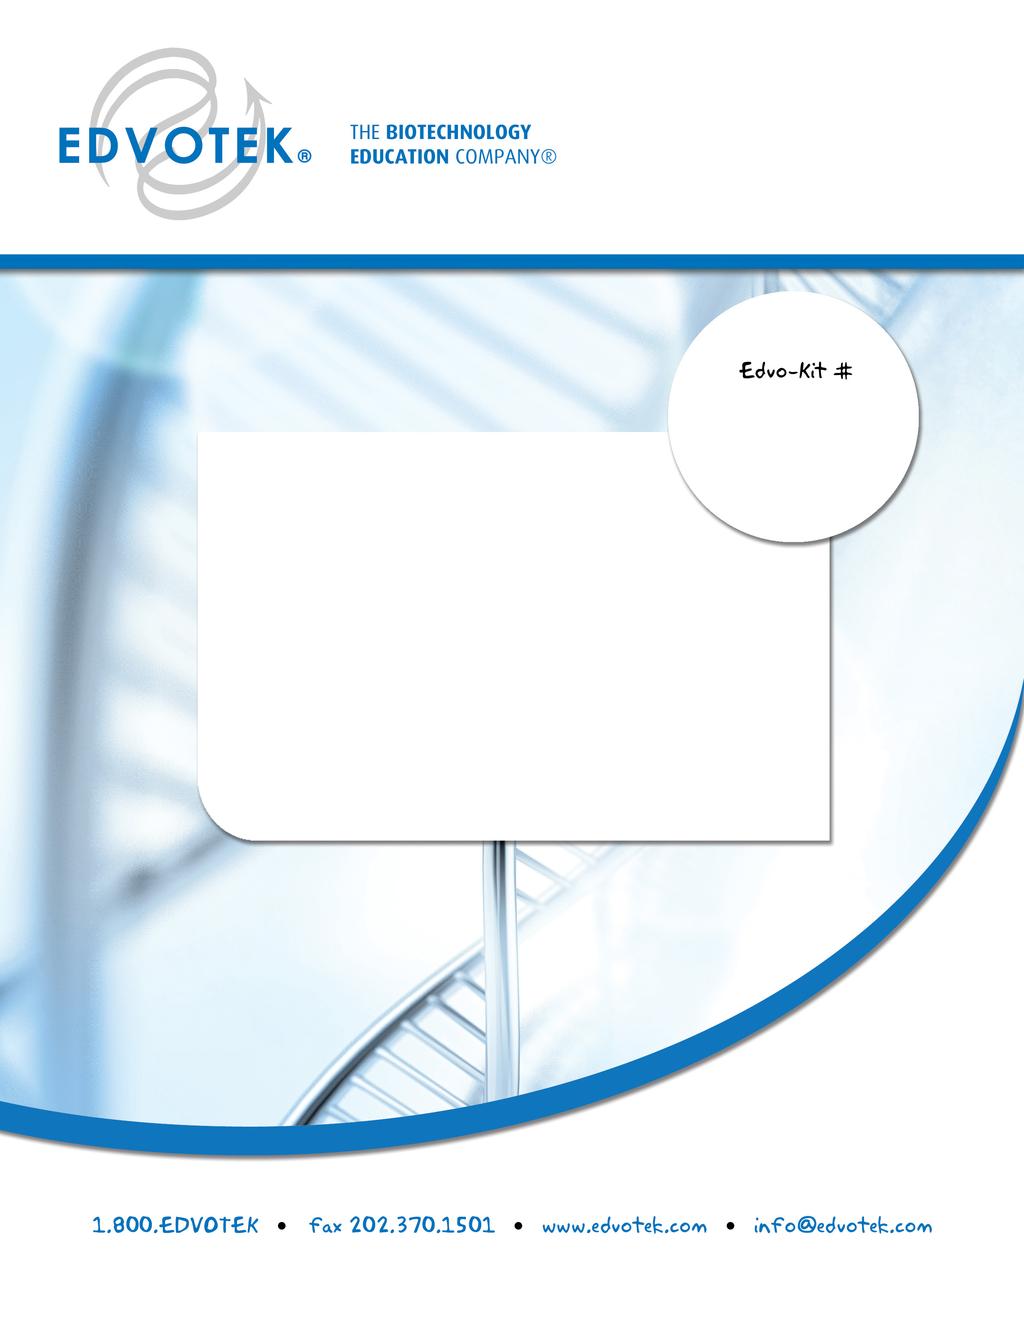 REVISED & UPDATED Edvo-Kit #113 Principles of Thin Layer Chromatography Experiment Objective: The objective of this experiment is to gain an understanding of the theory